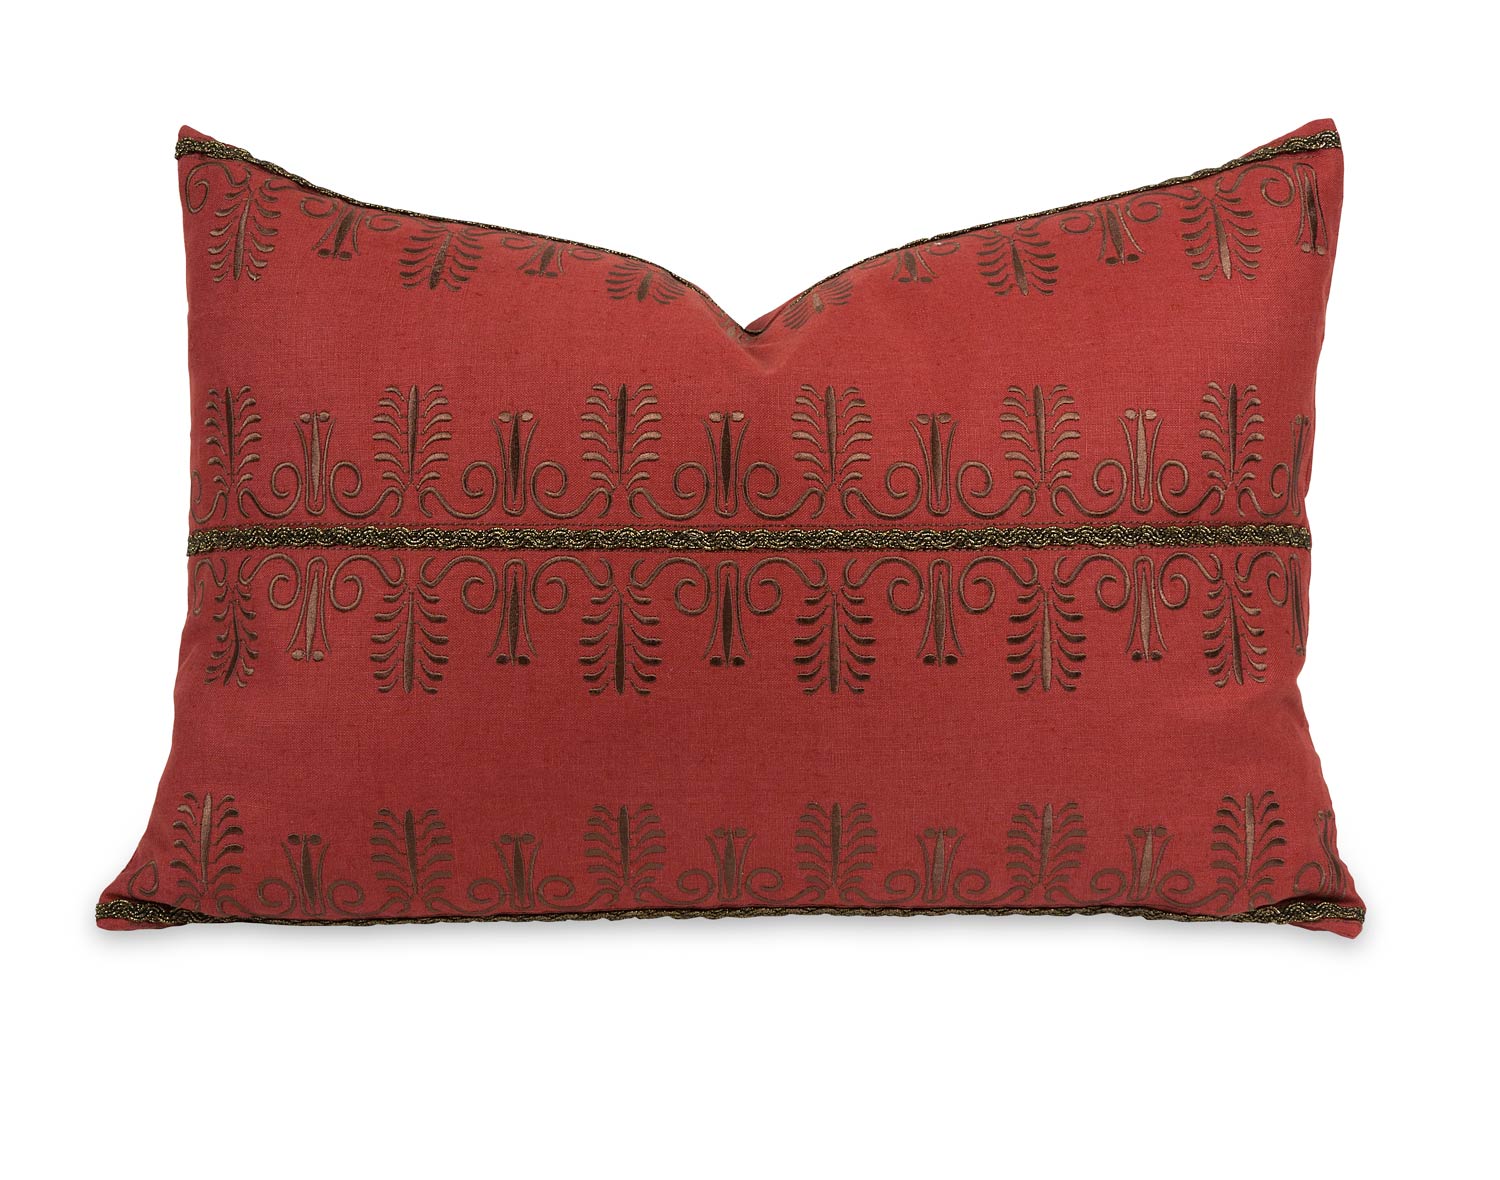 IMAX Ik Arezo Beaded Embroidery Pillow with Down Insert